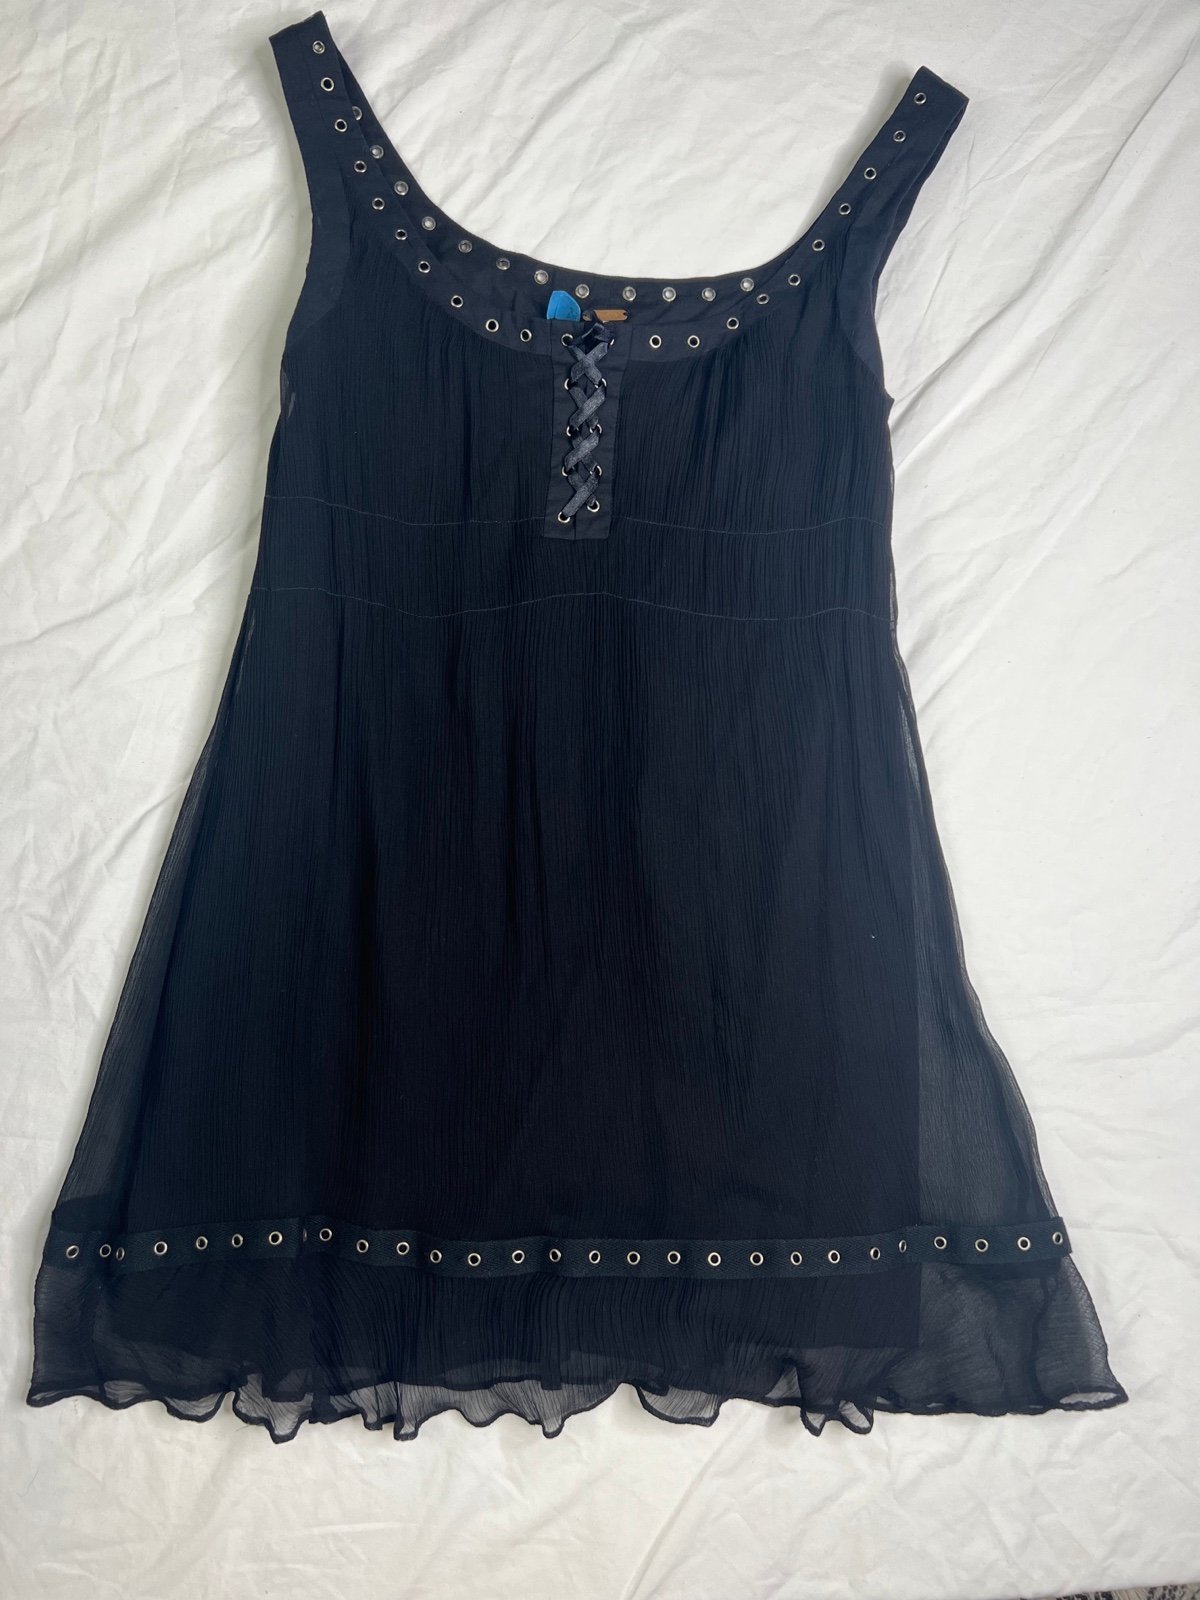 Simple Free People Top Womens Size 6 Silk Black Lined Camisole Top A030723 imBKFe6Vx Low Price